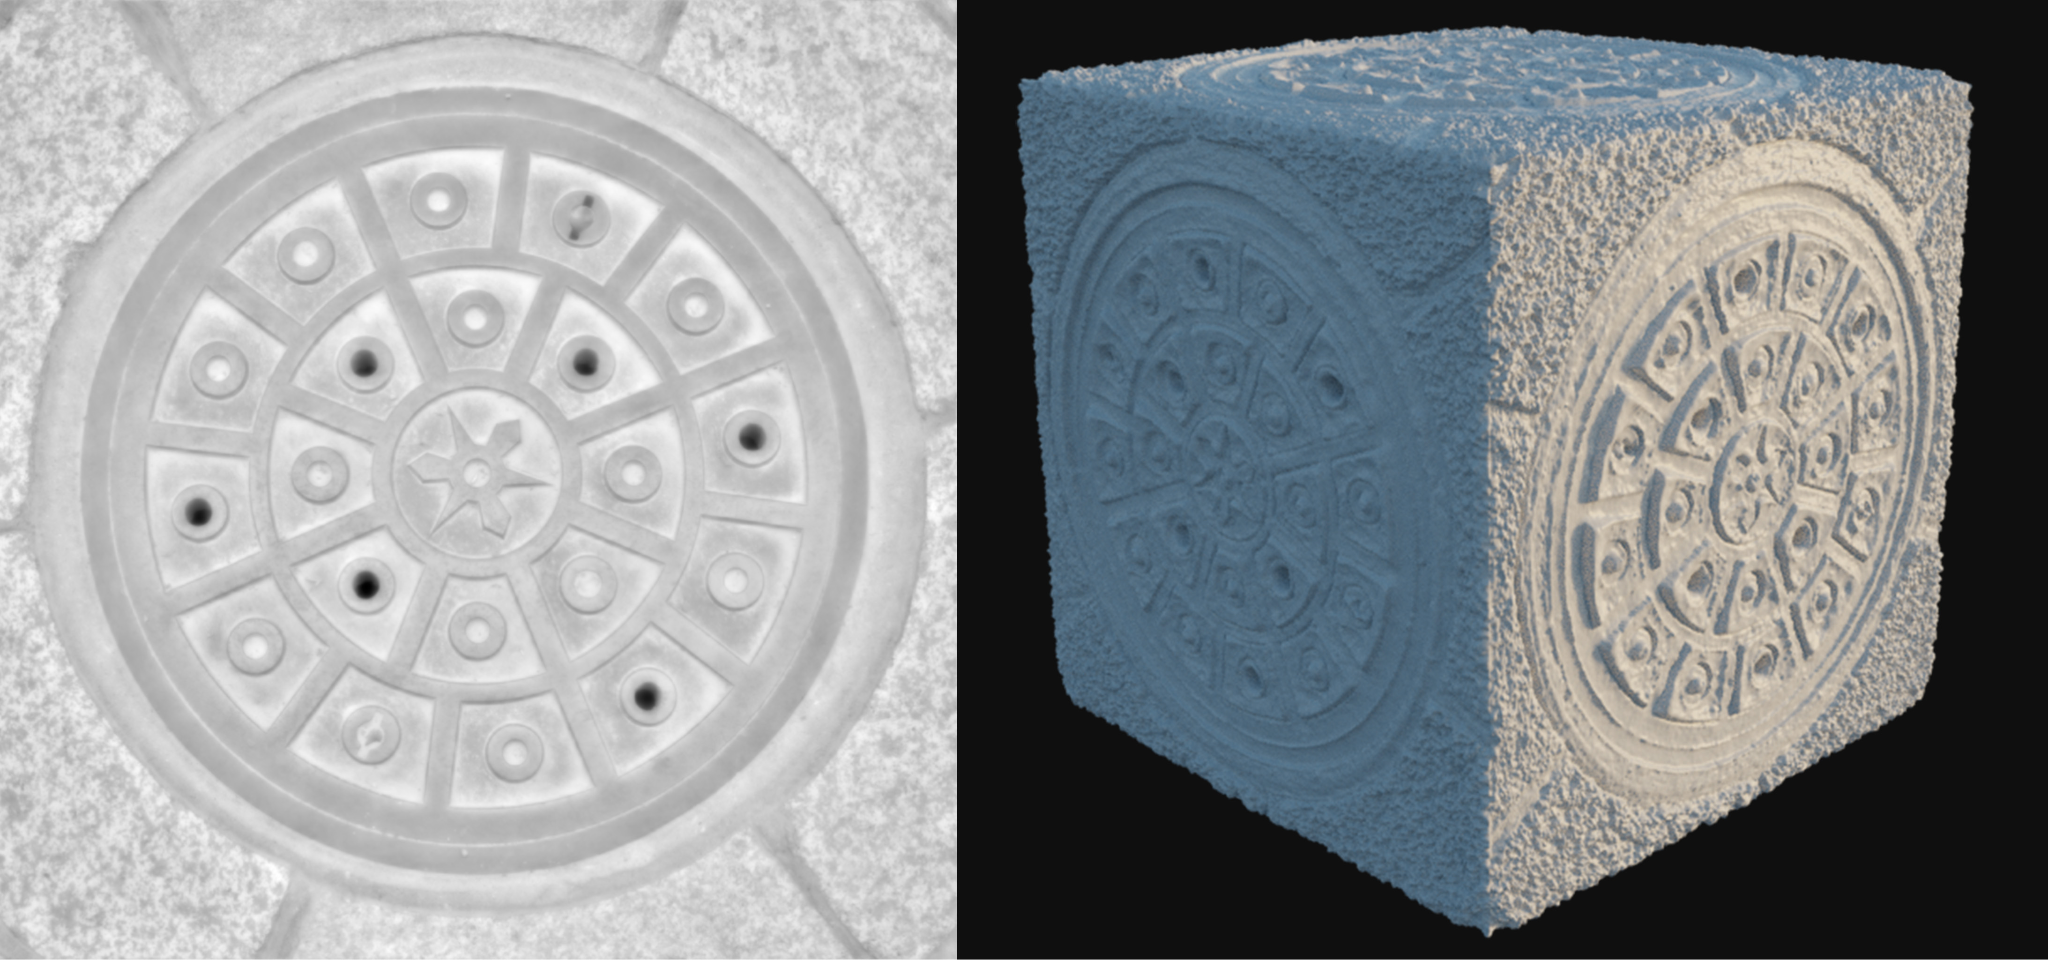 A model using displacement map